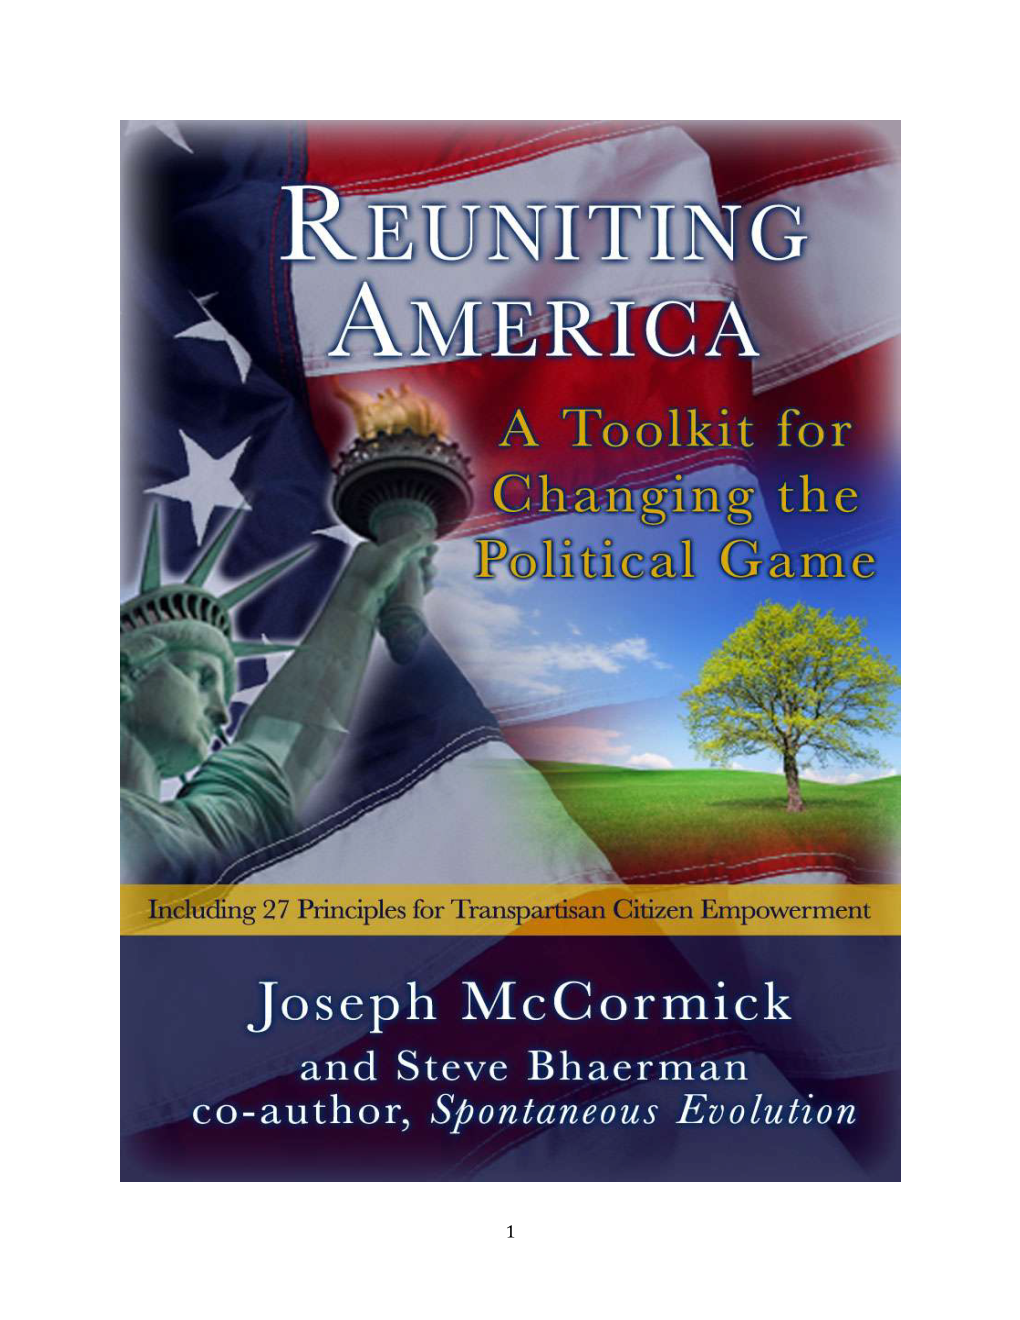 REUNITING AMERICA a Toolkit for Changing the Political Game by Joseph Mccormick and Steve Bhaerman